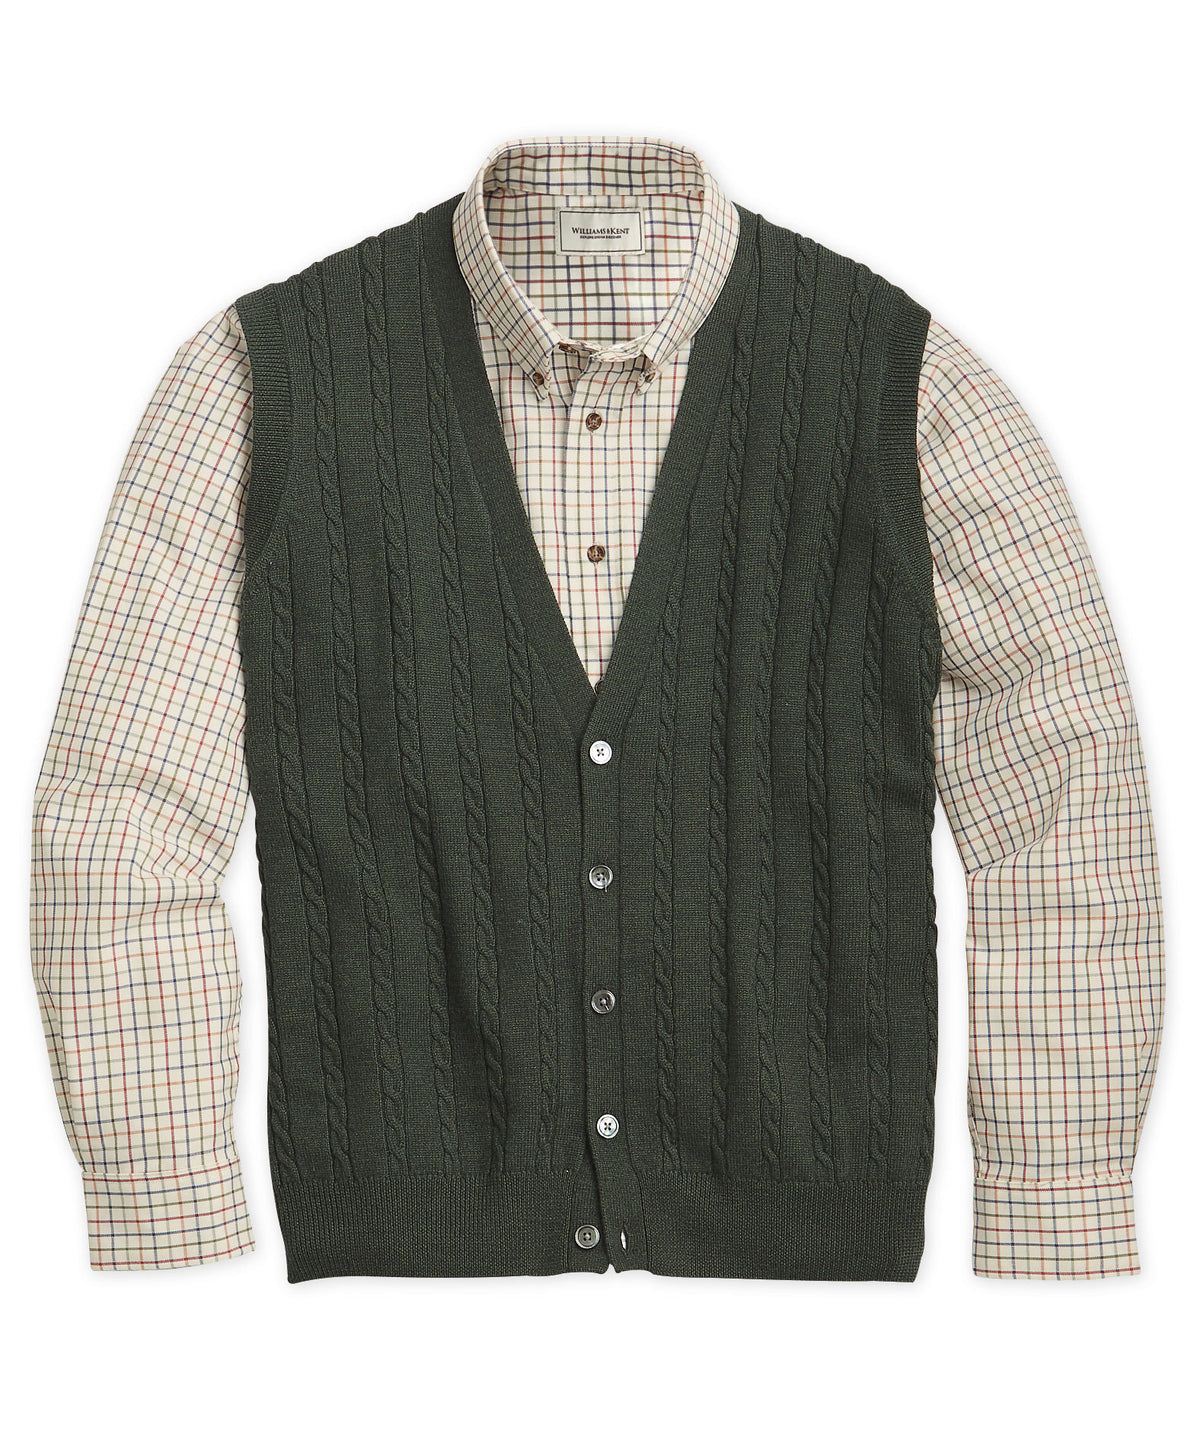 Italian Merino Wool Button-Front Cable Sweater Vest